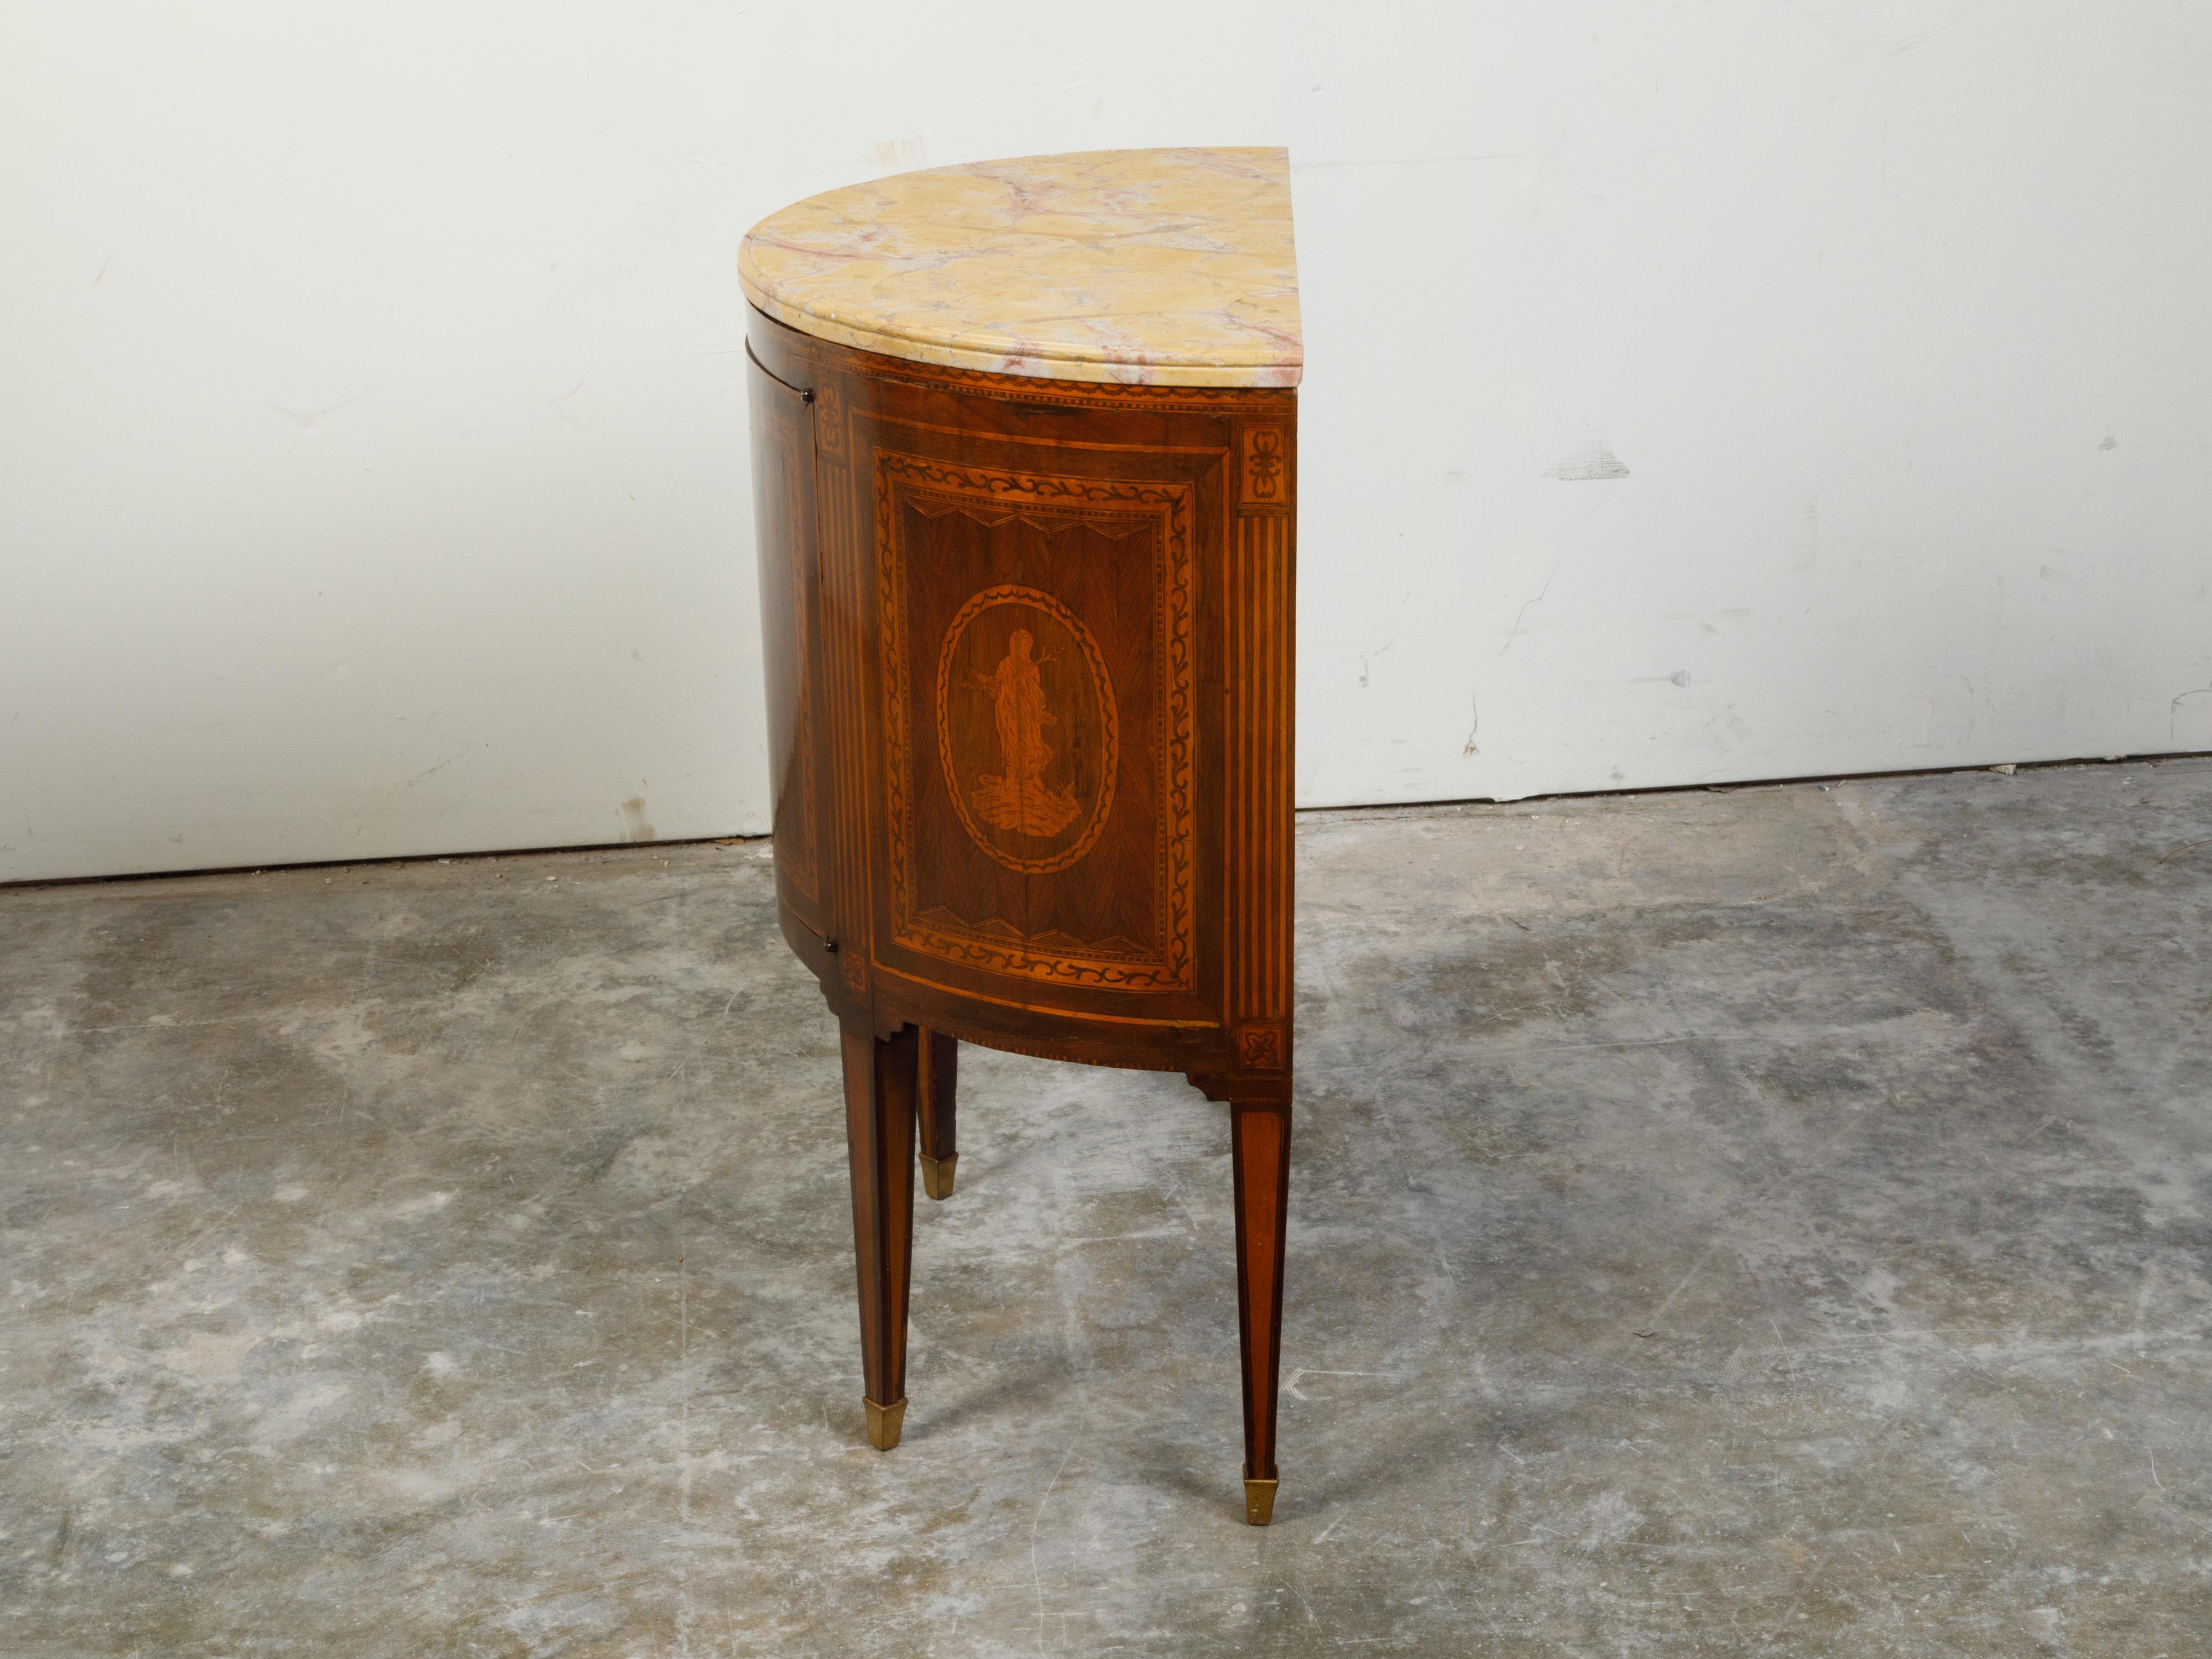 Italian Neoclassical 18th Century Walnut Demilune Cabinet with Marquetry Décor For Sale 1